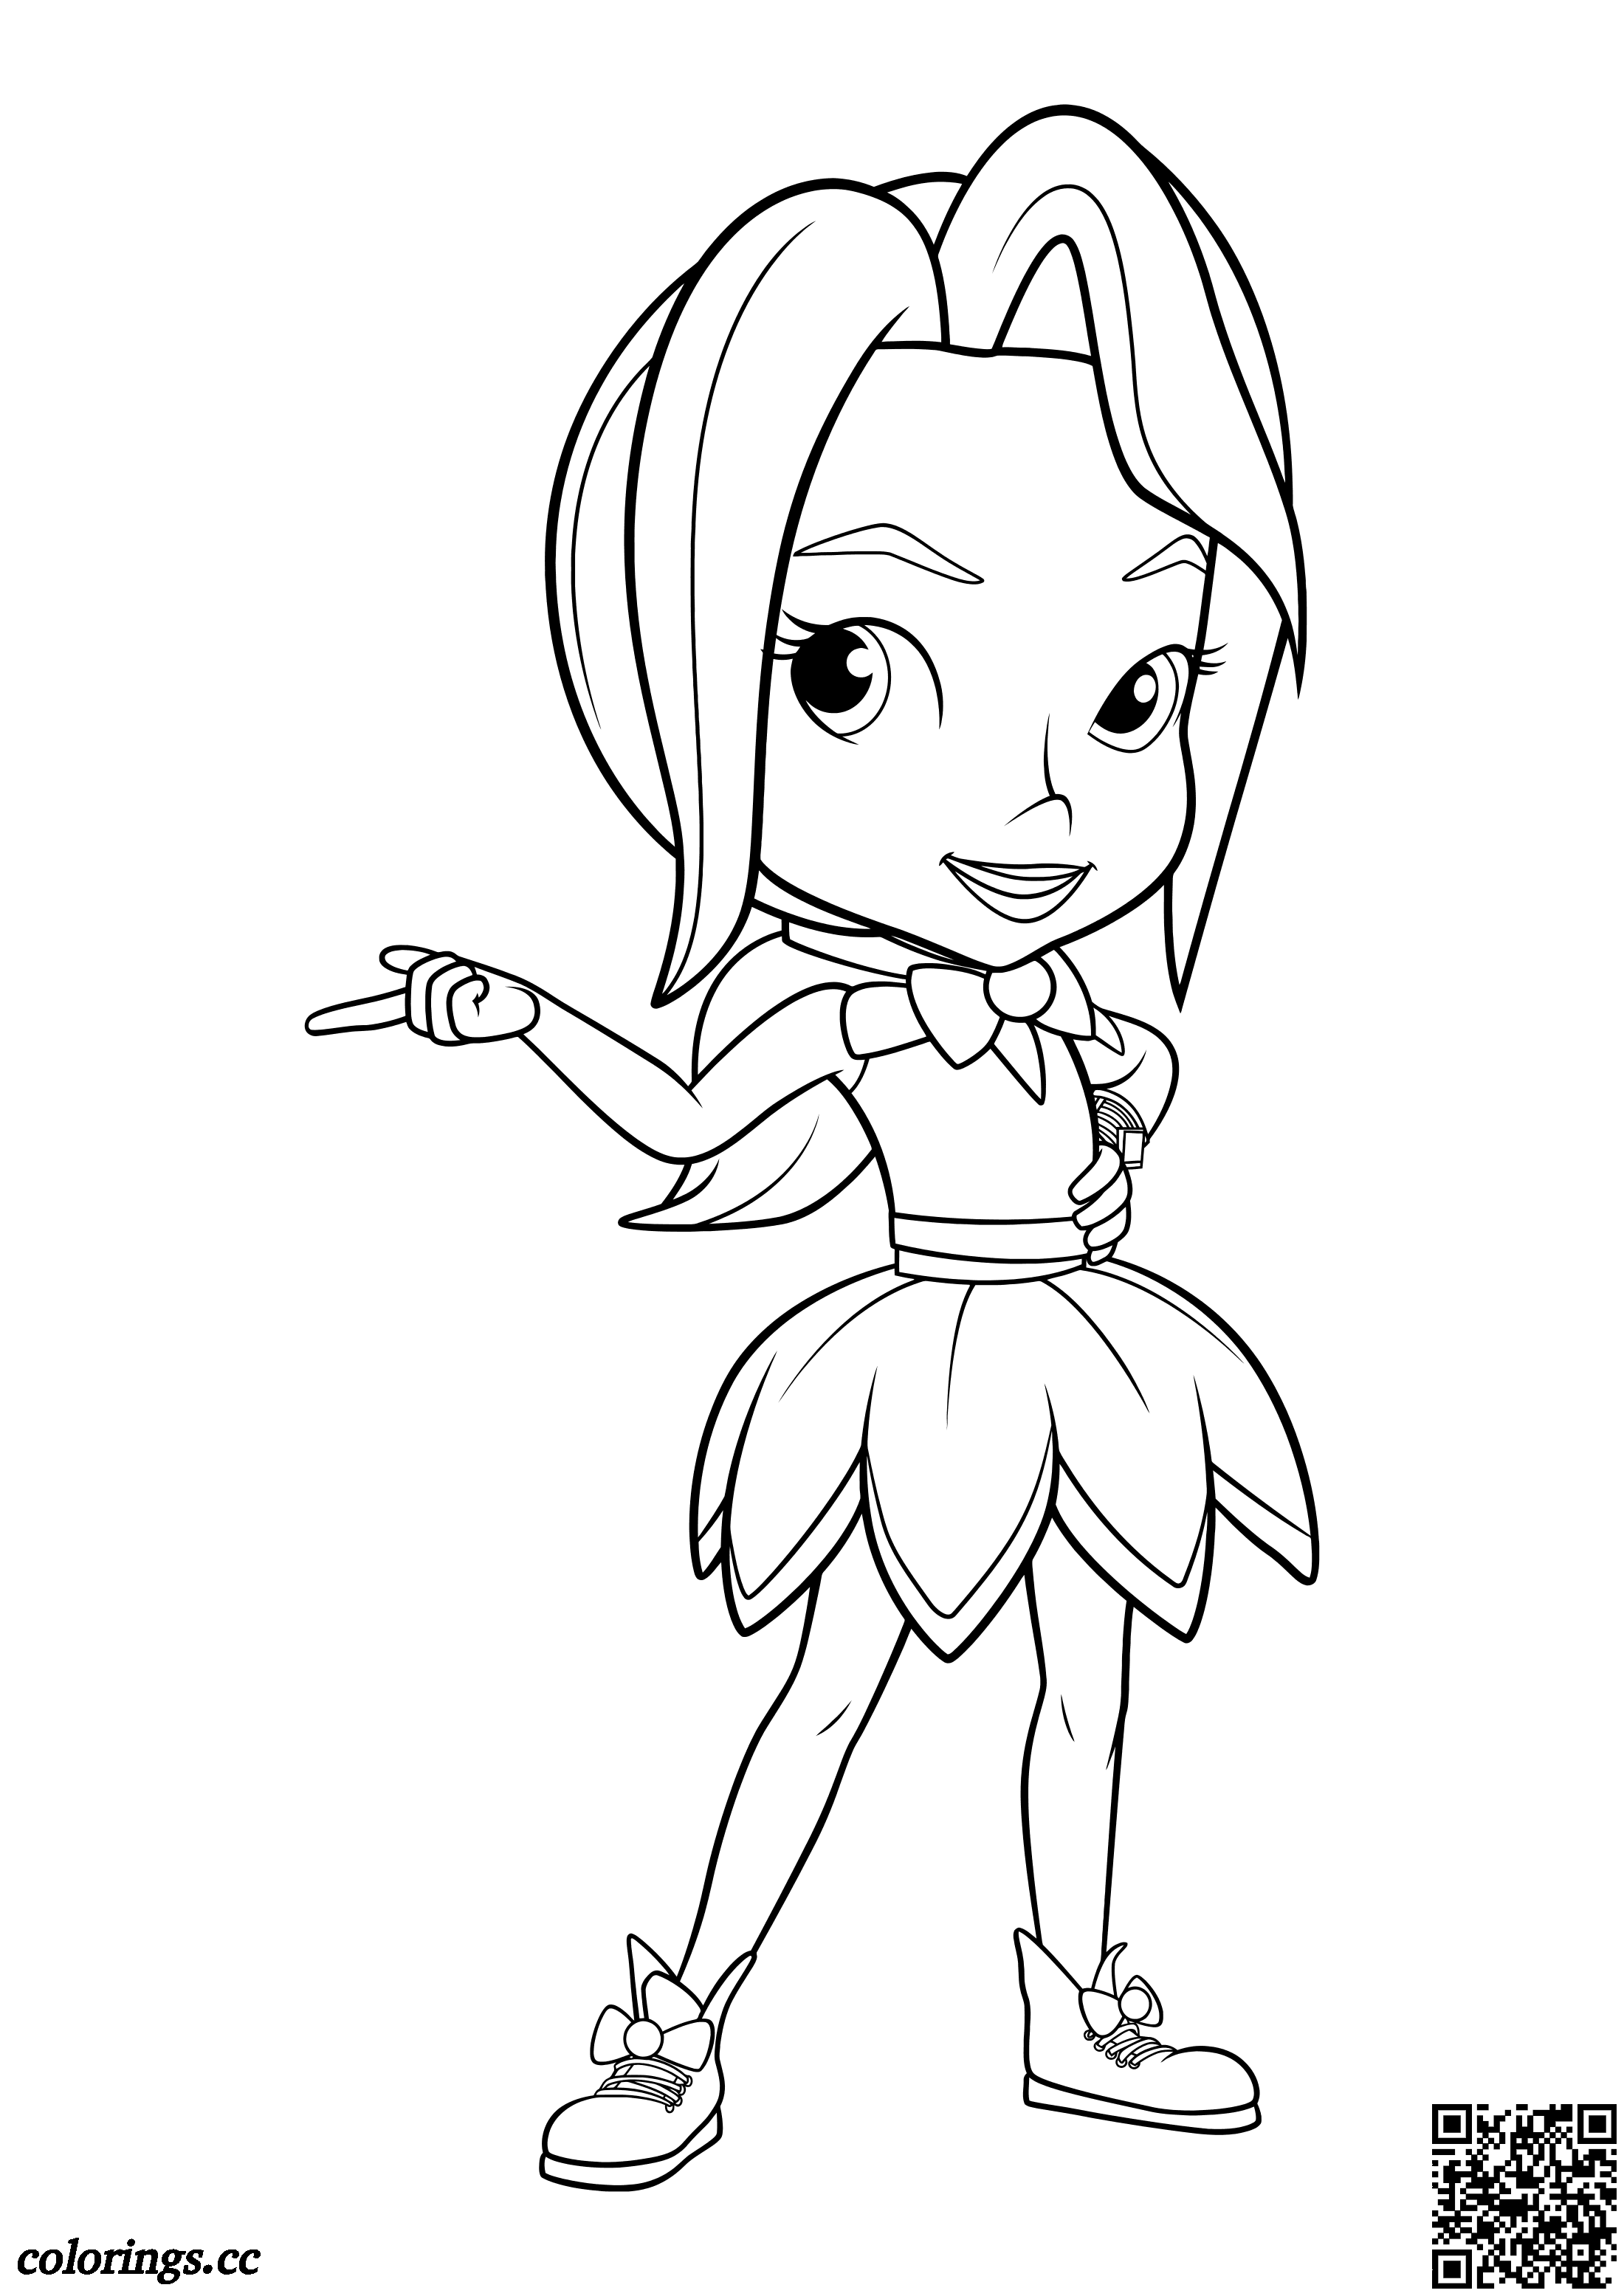 Indigo Allfruit coloring pages, Rainbow Rangers coloring pages